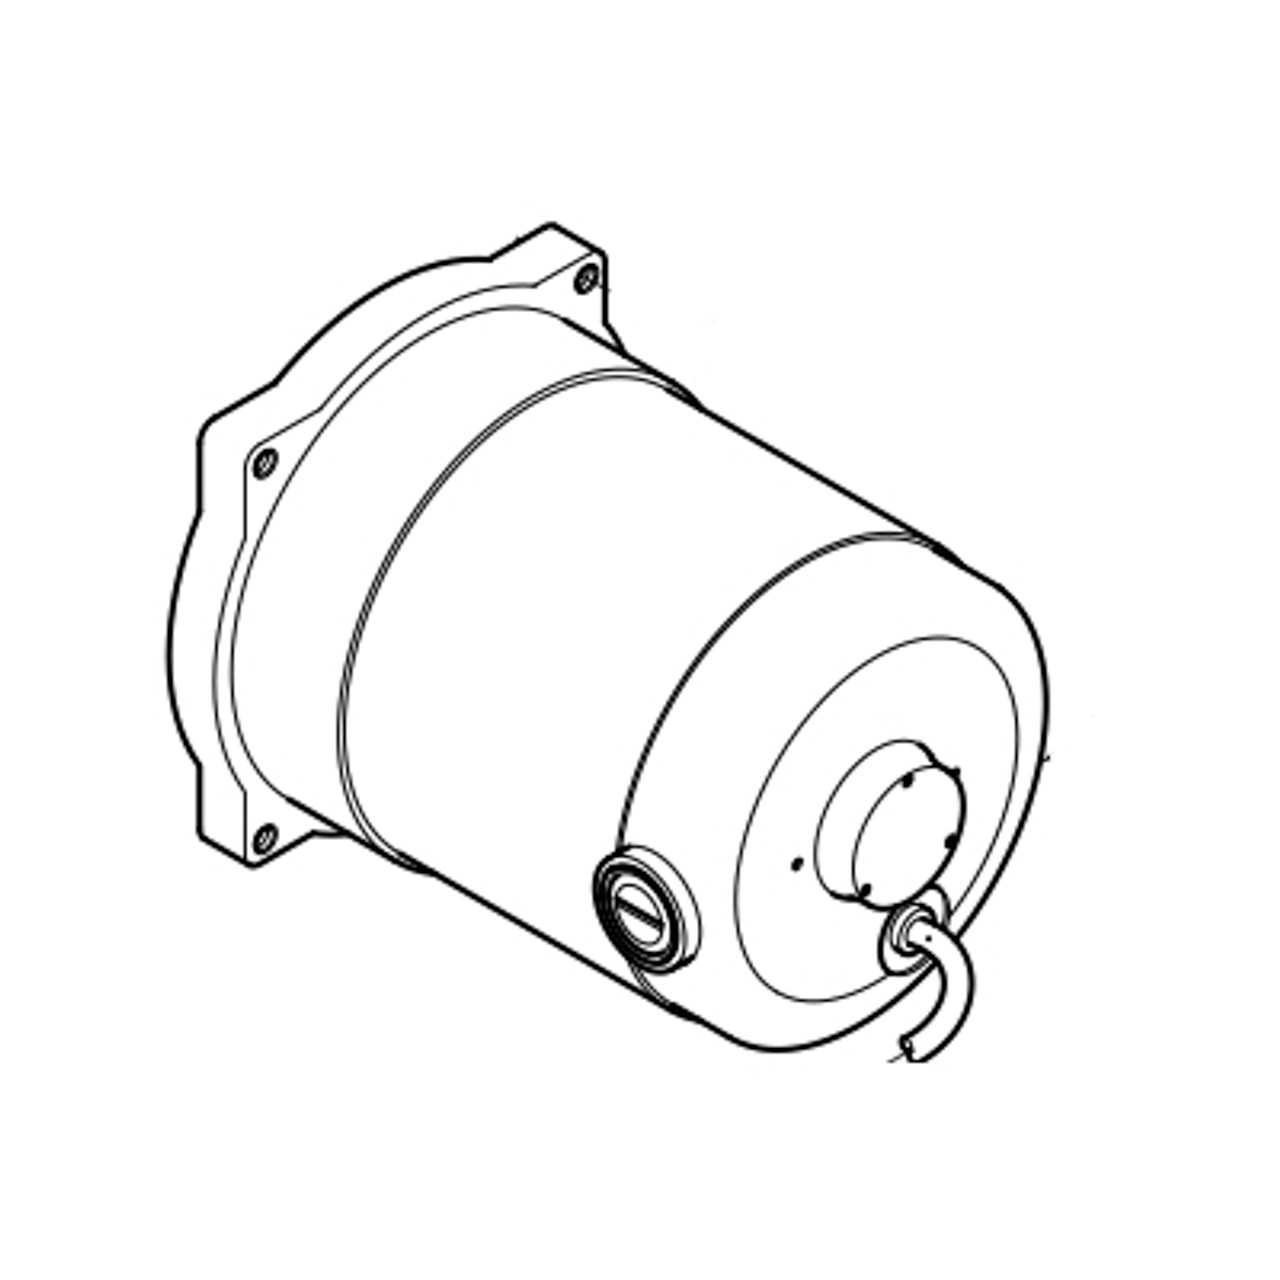 Electric Motor Assembly without Terminals Image